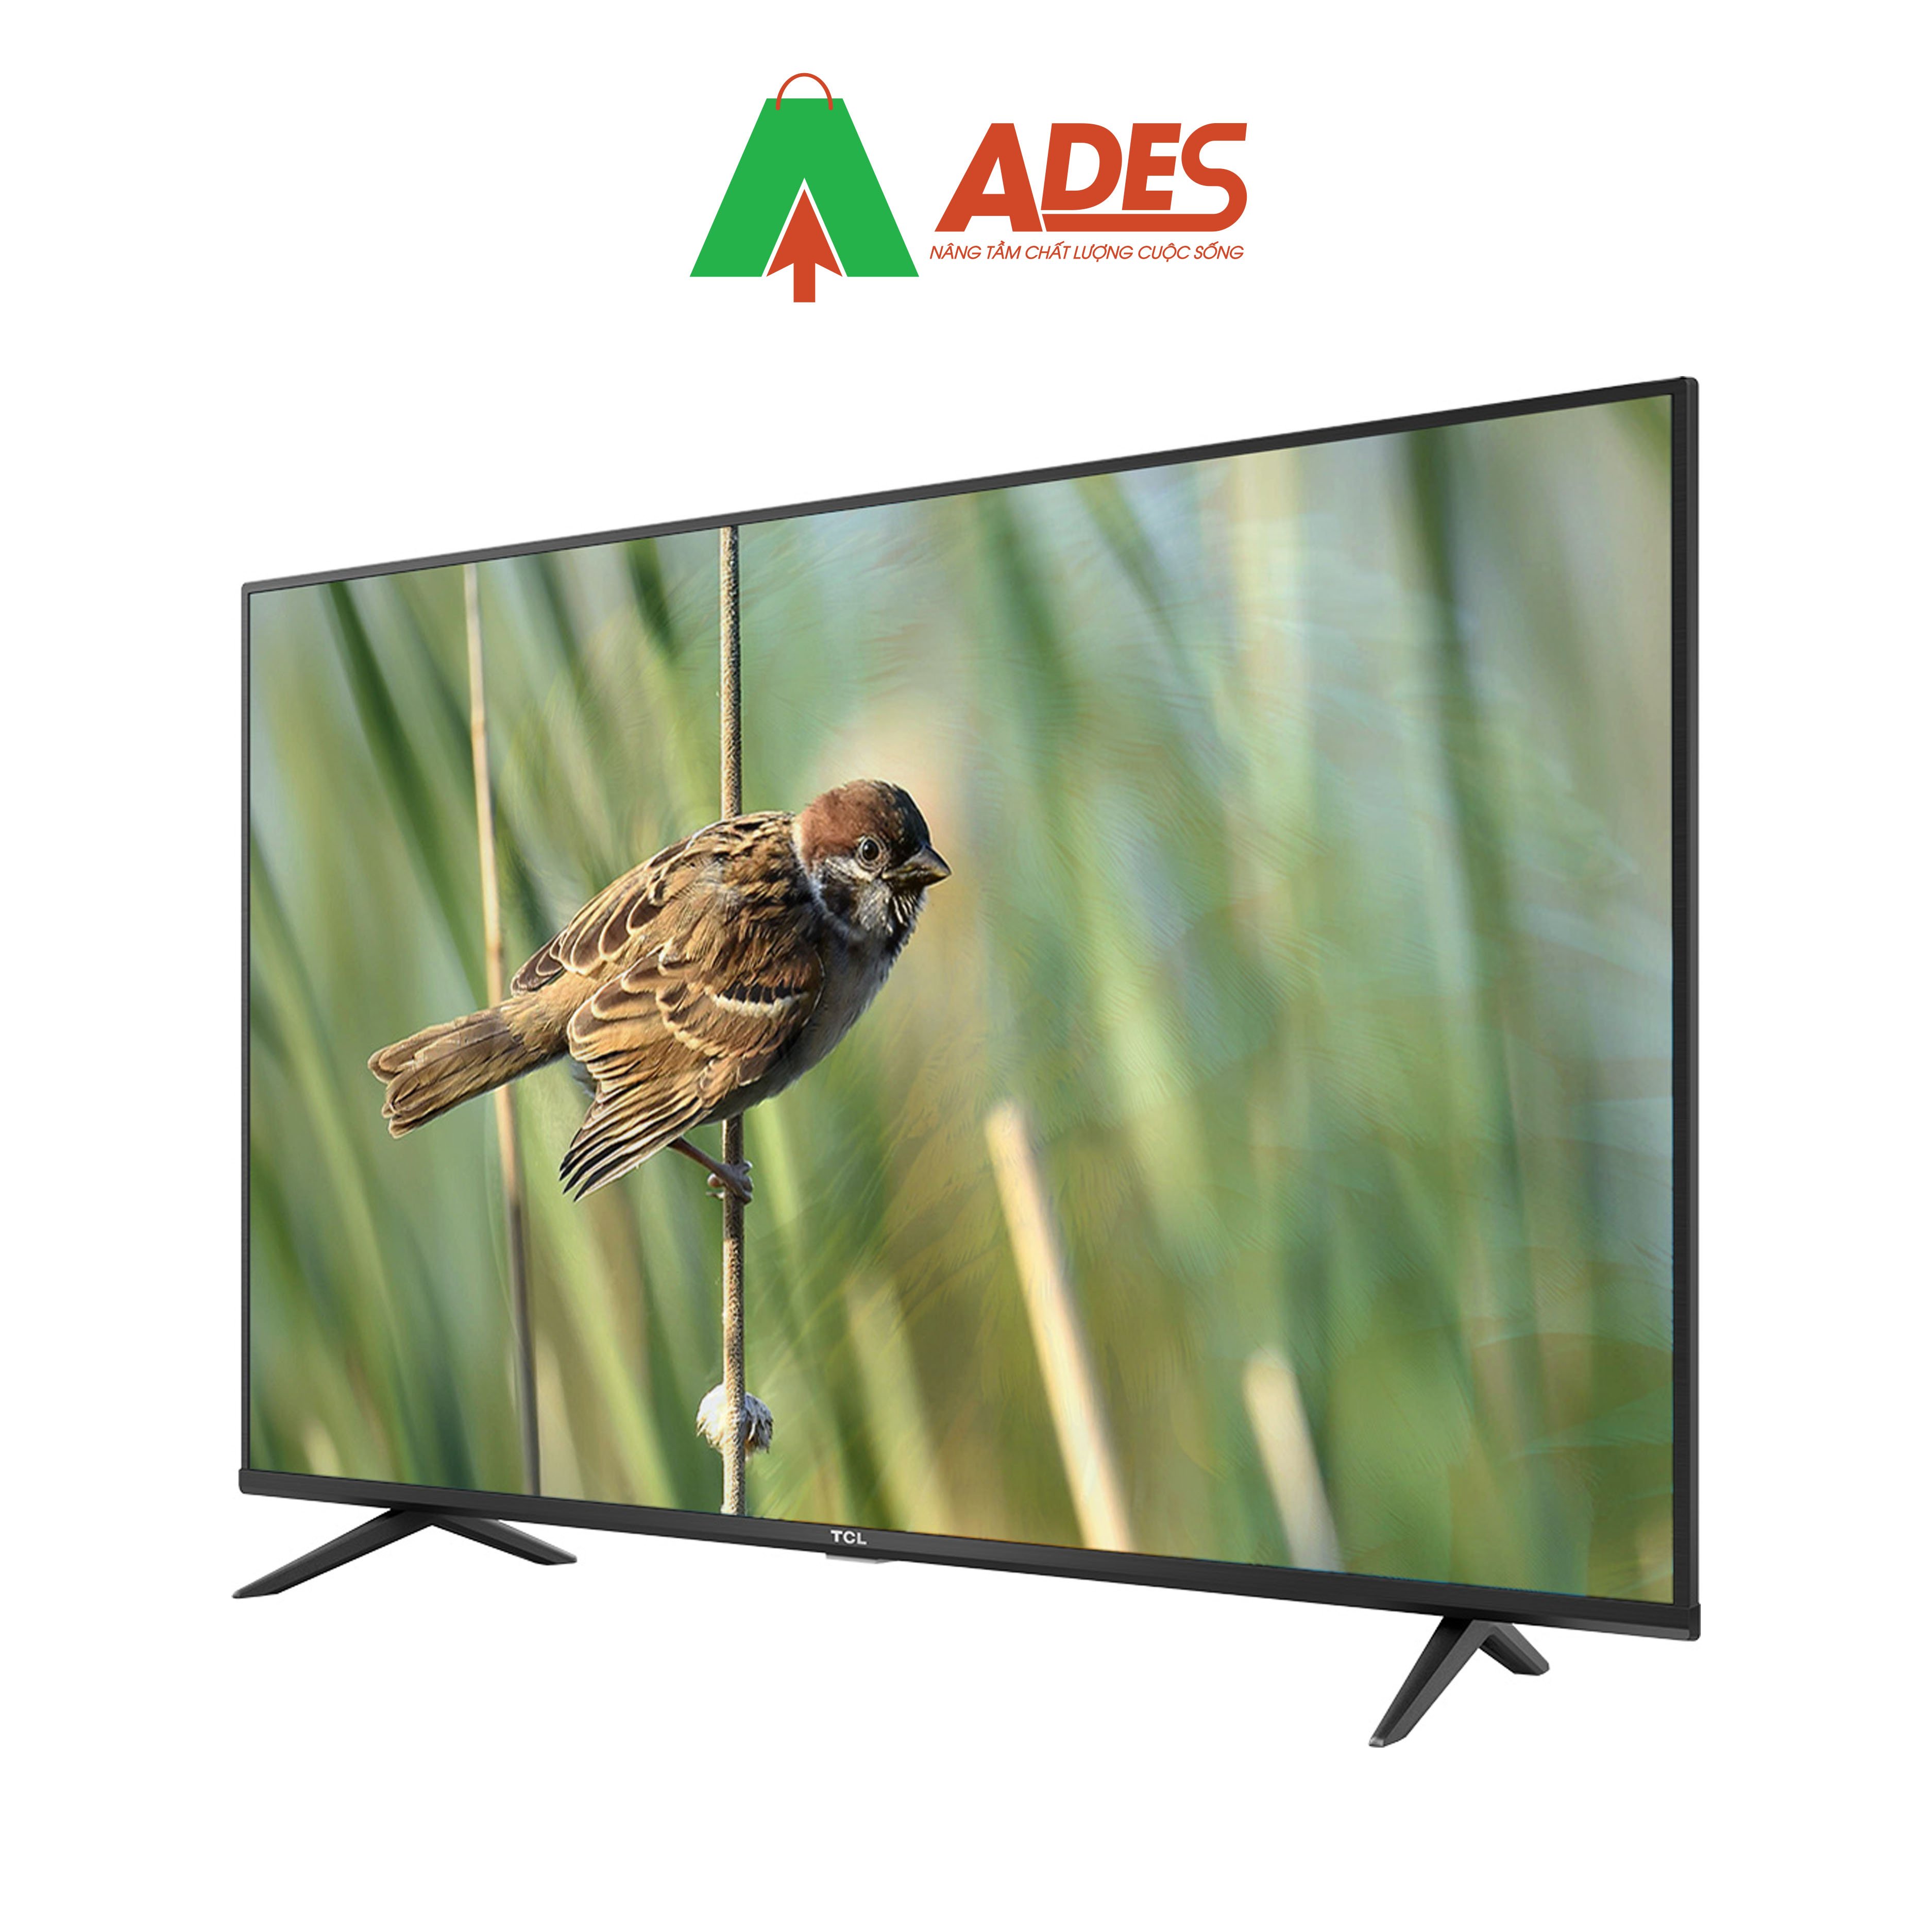 Hinh anh thuc te Android TiVi TCL 4K 50inch 50Q726